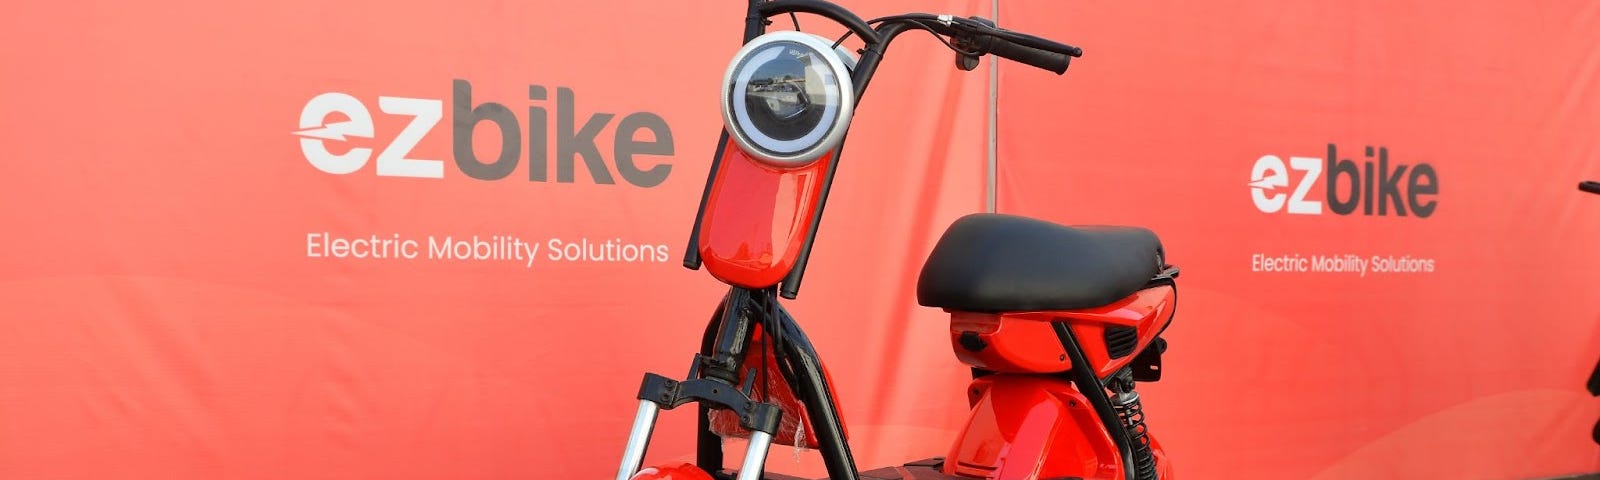 An orange electric motorbike in front of sign saying ezBike